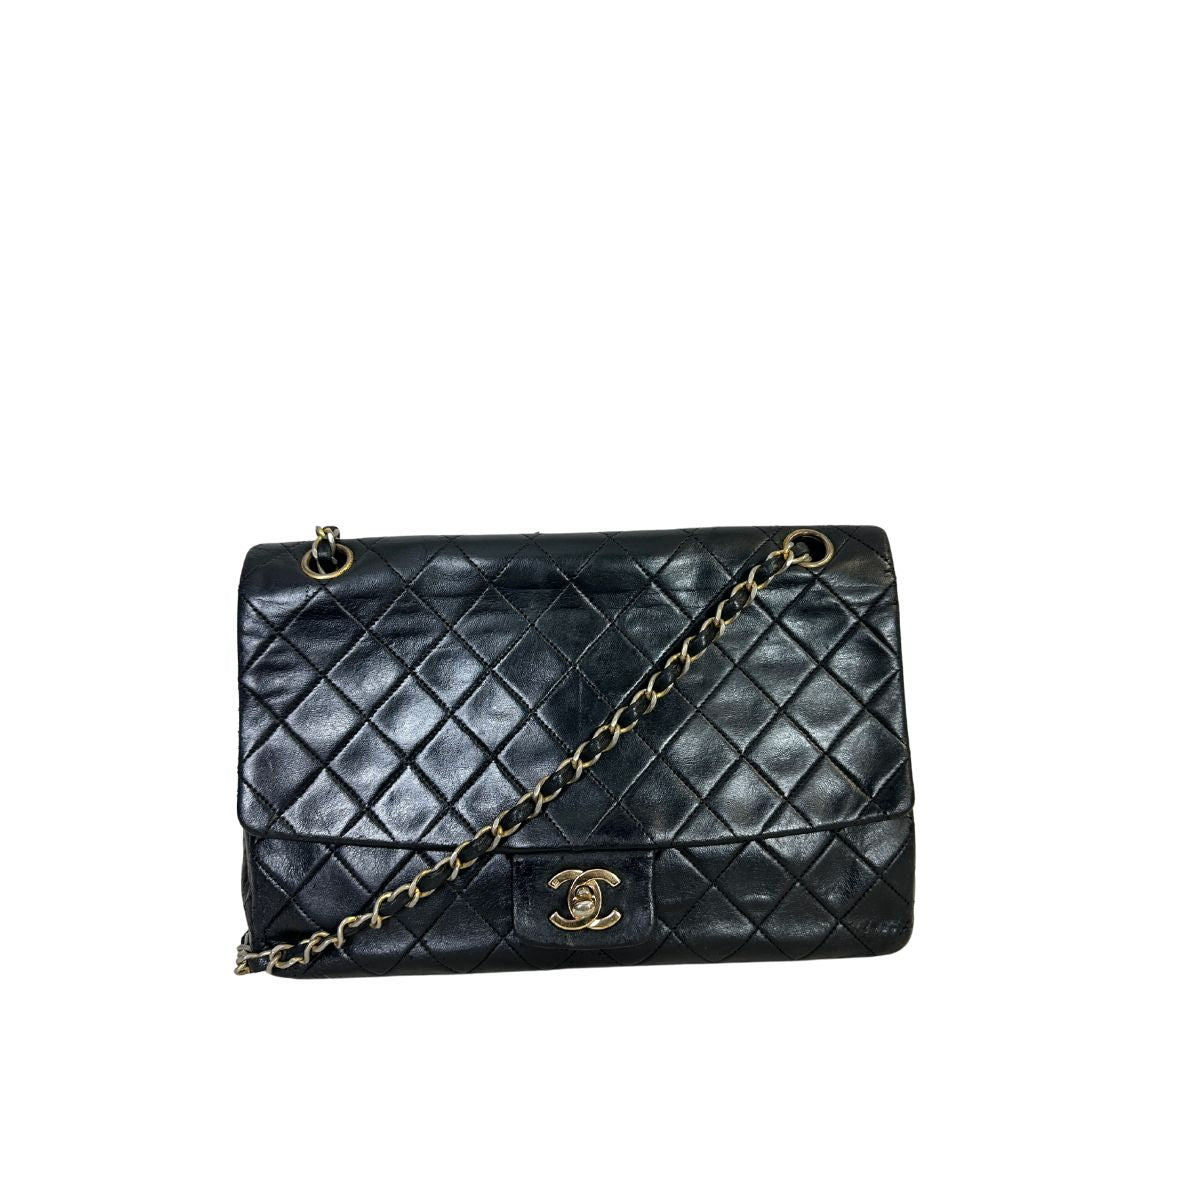 Sold at Auction: Chanel Vintage Quilted Lambskin Medium Single